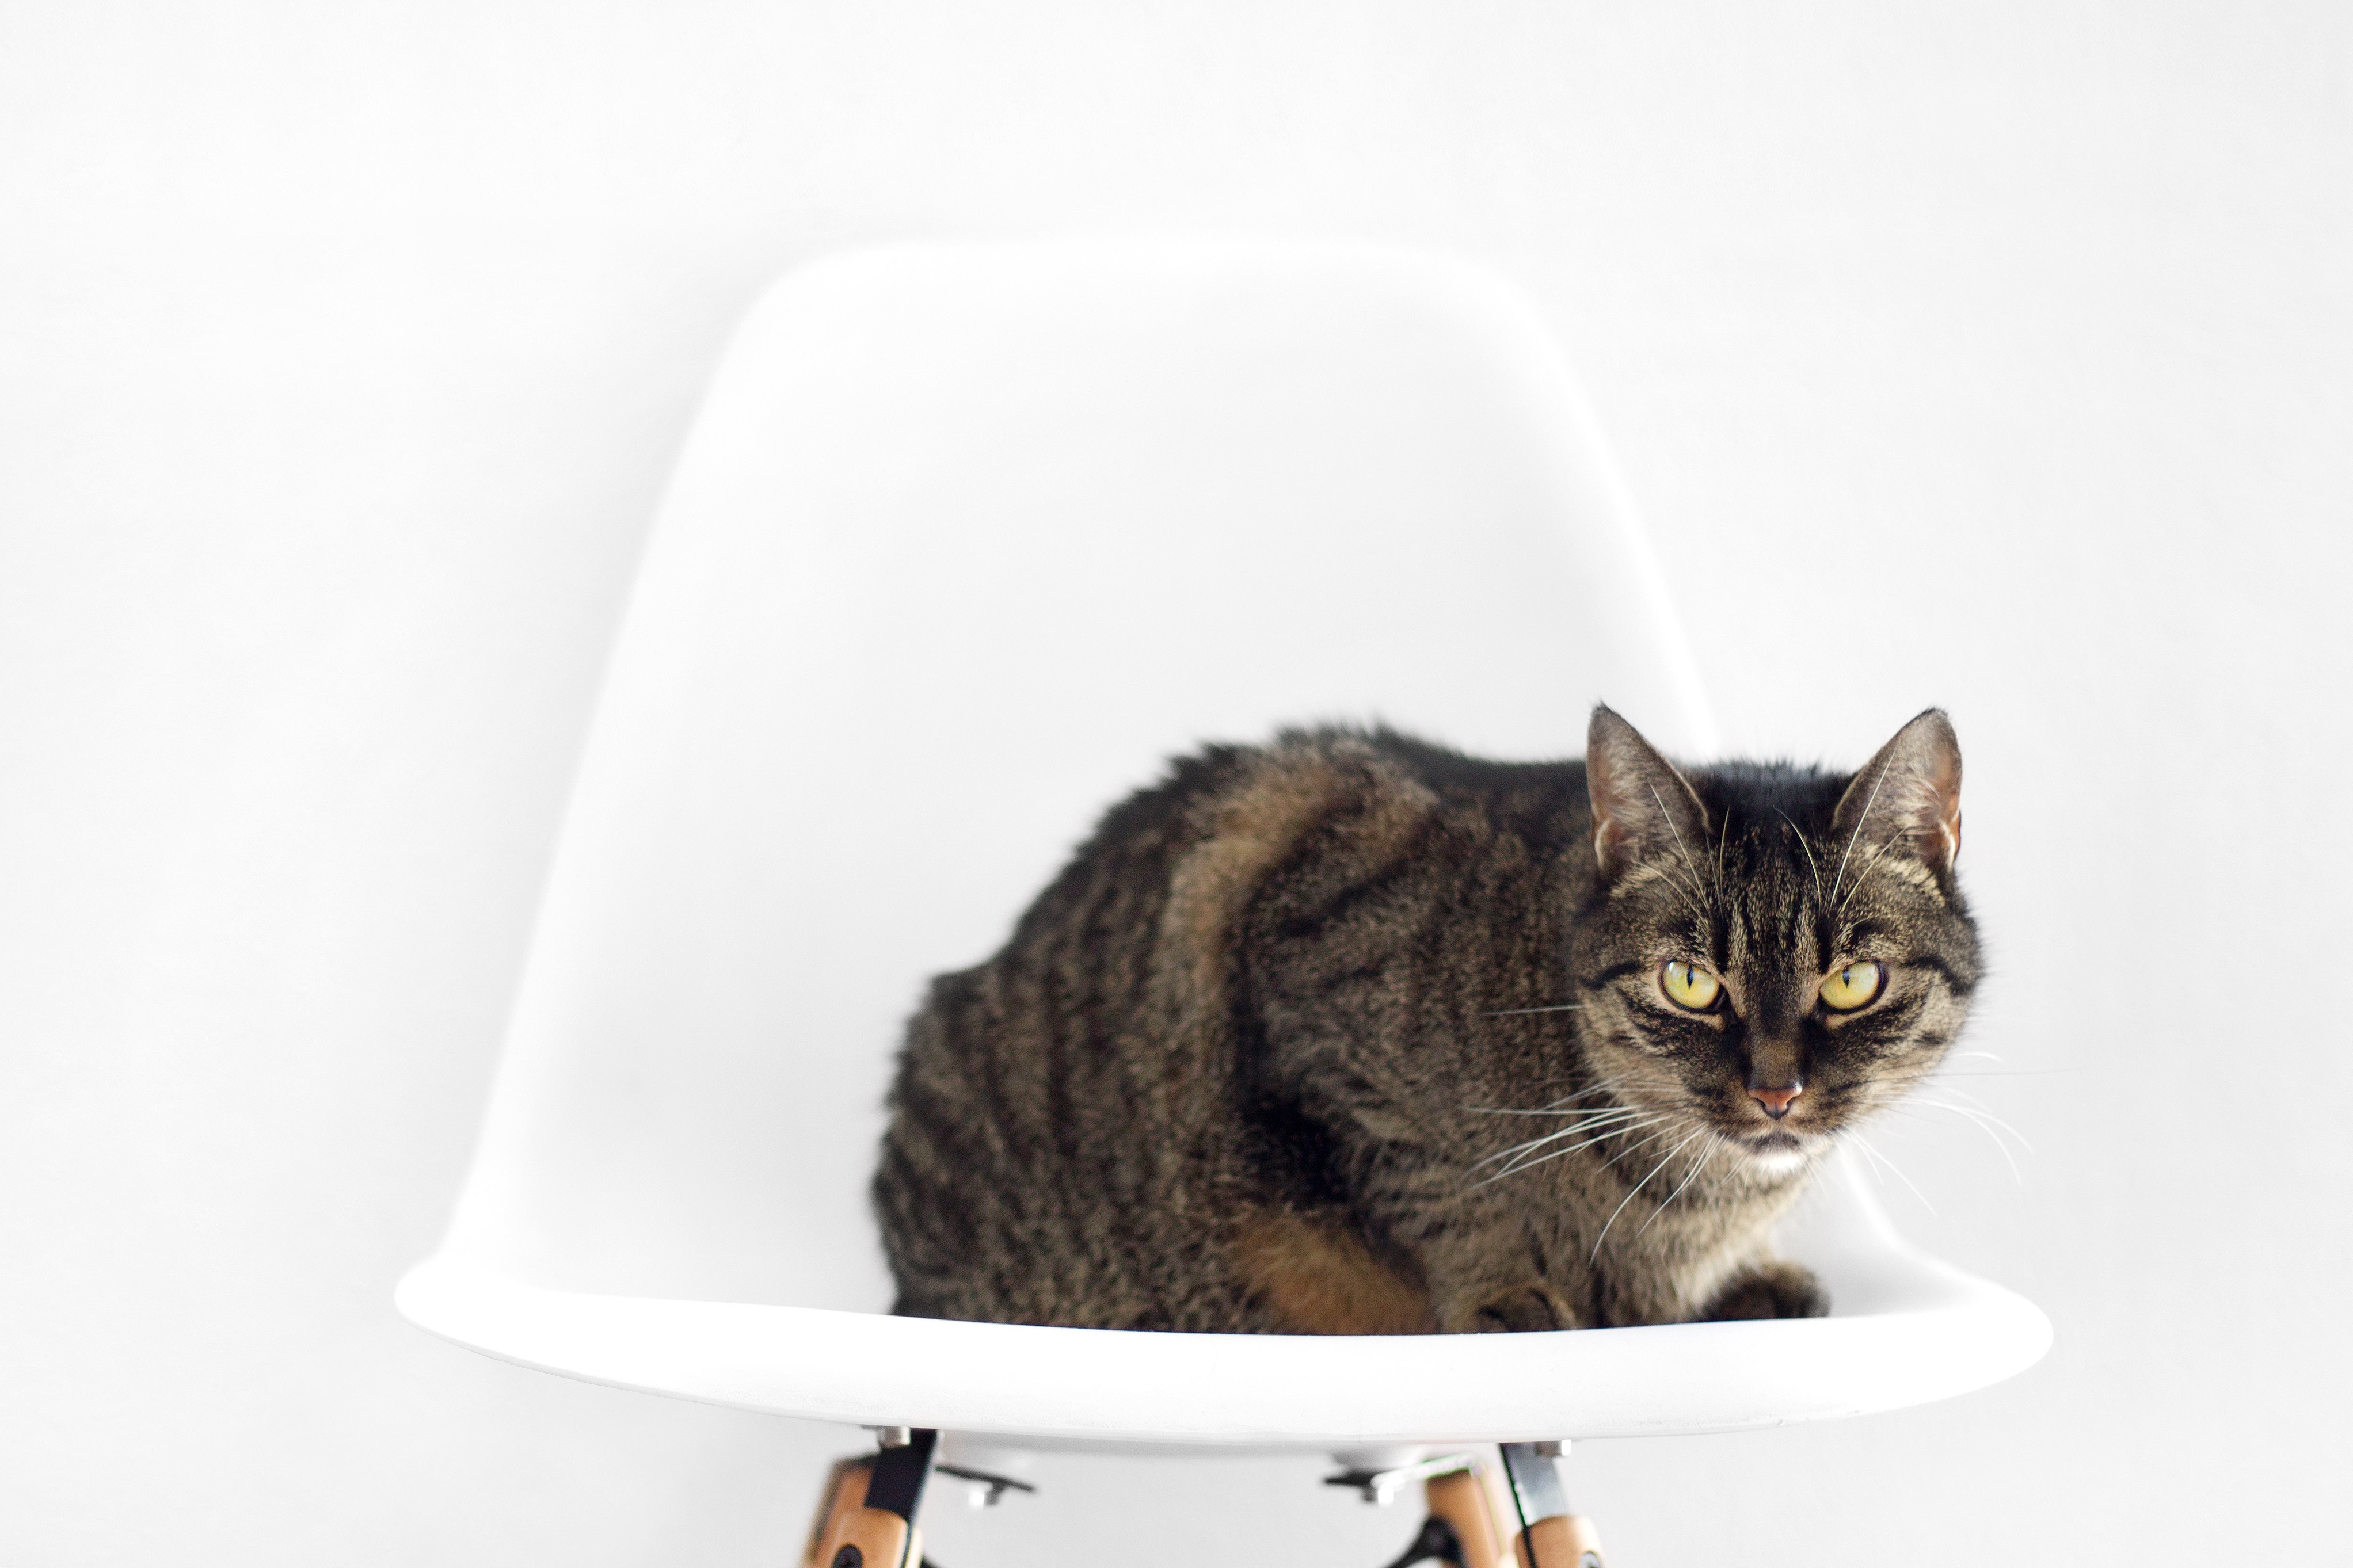 Free photo The cat took the white desk chair